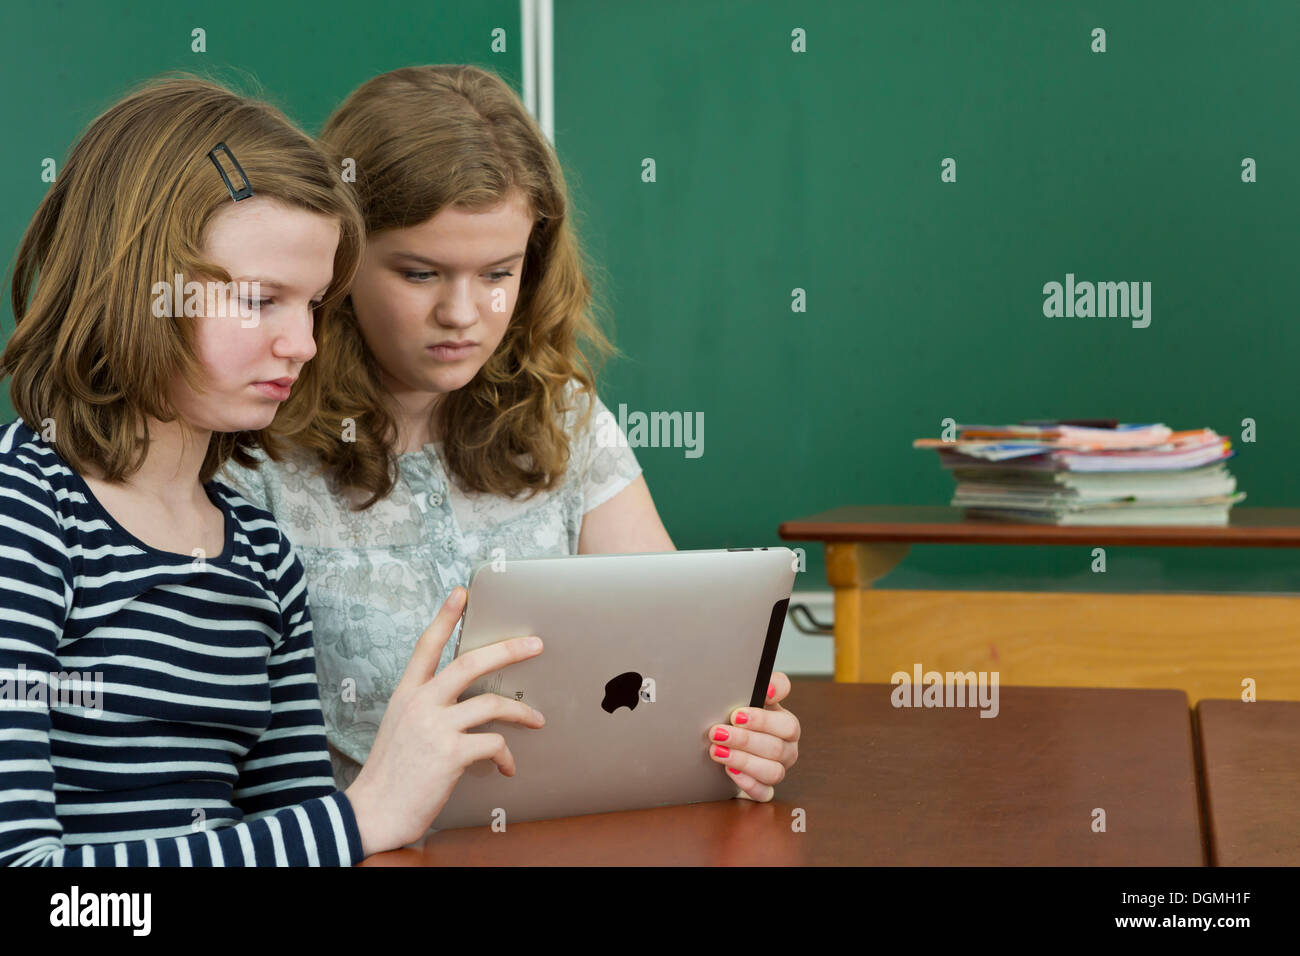 Two schoolgirls in the classroom using a tablet PC, Germany Stock Photo